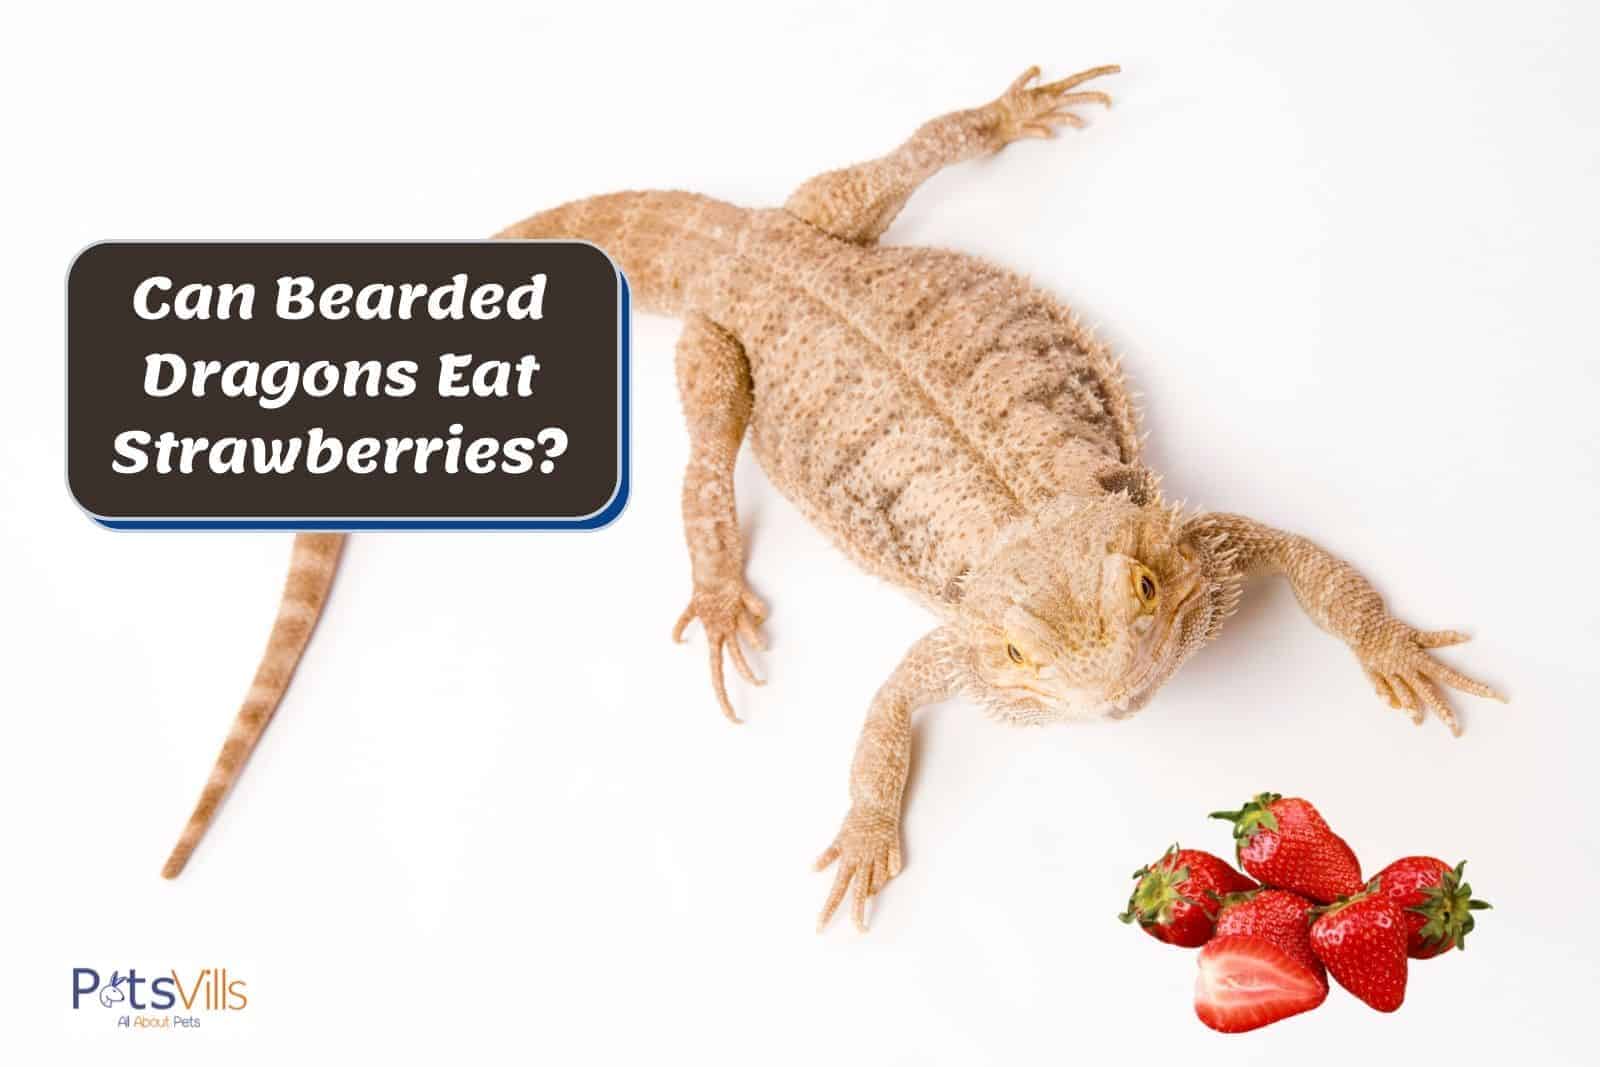 brown bearded dragon and fresh strawberries: can bearded dragons eat strawberries?